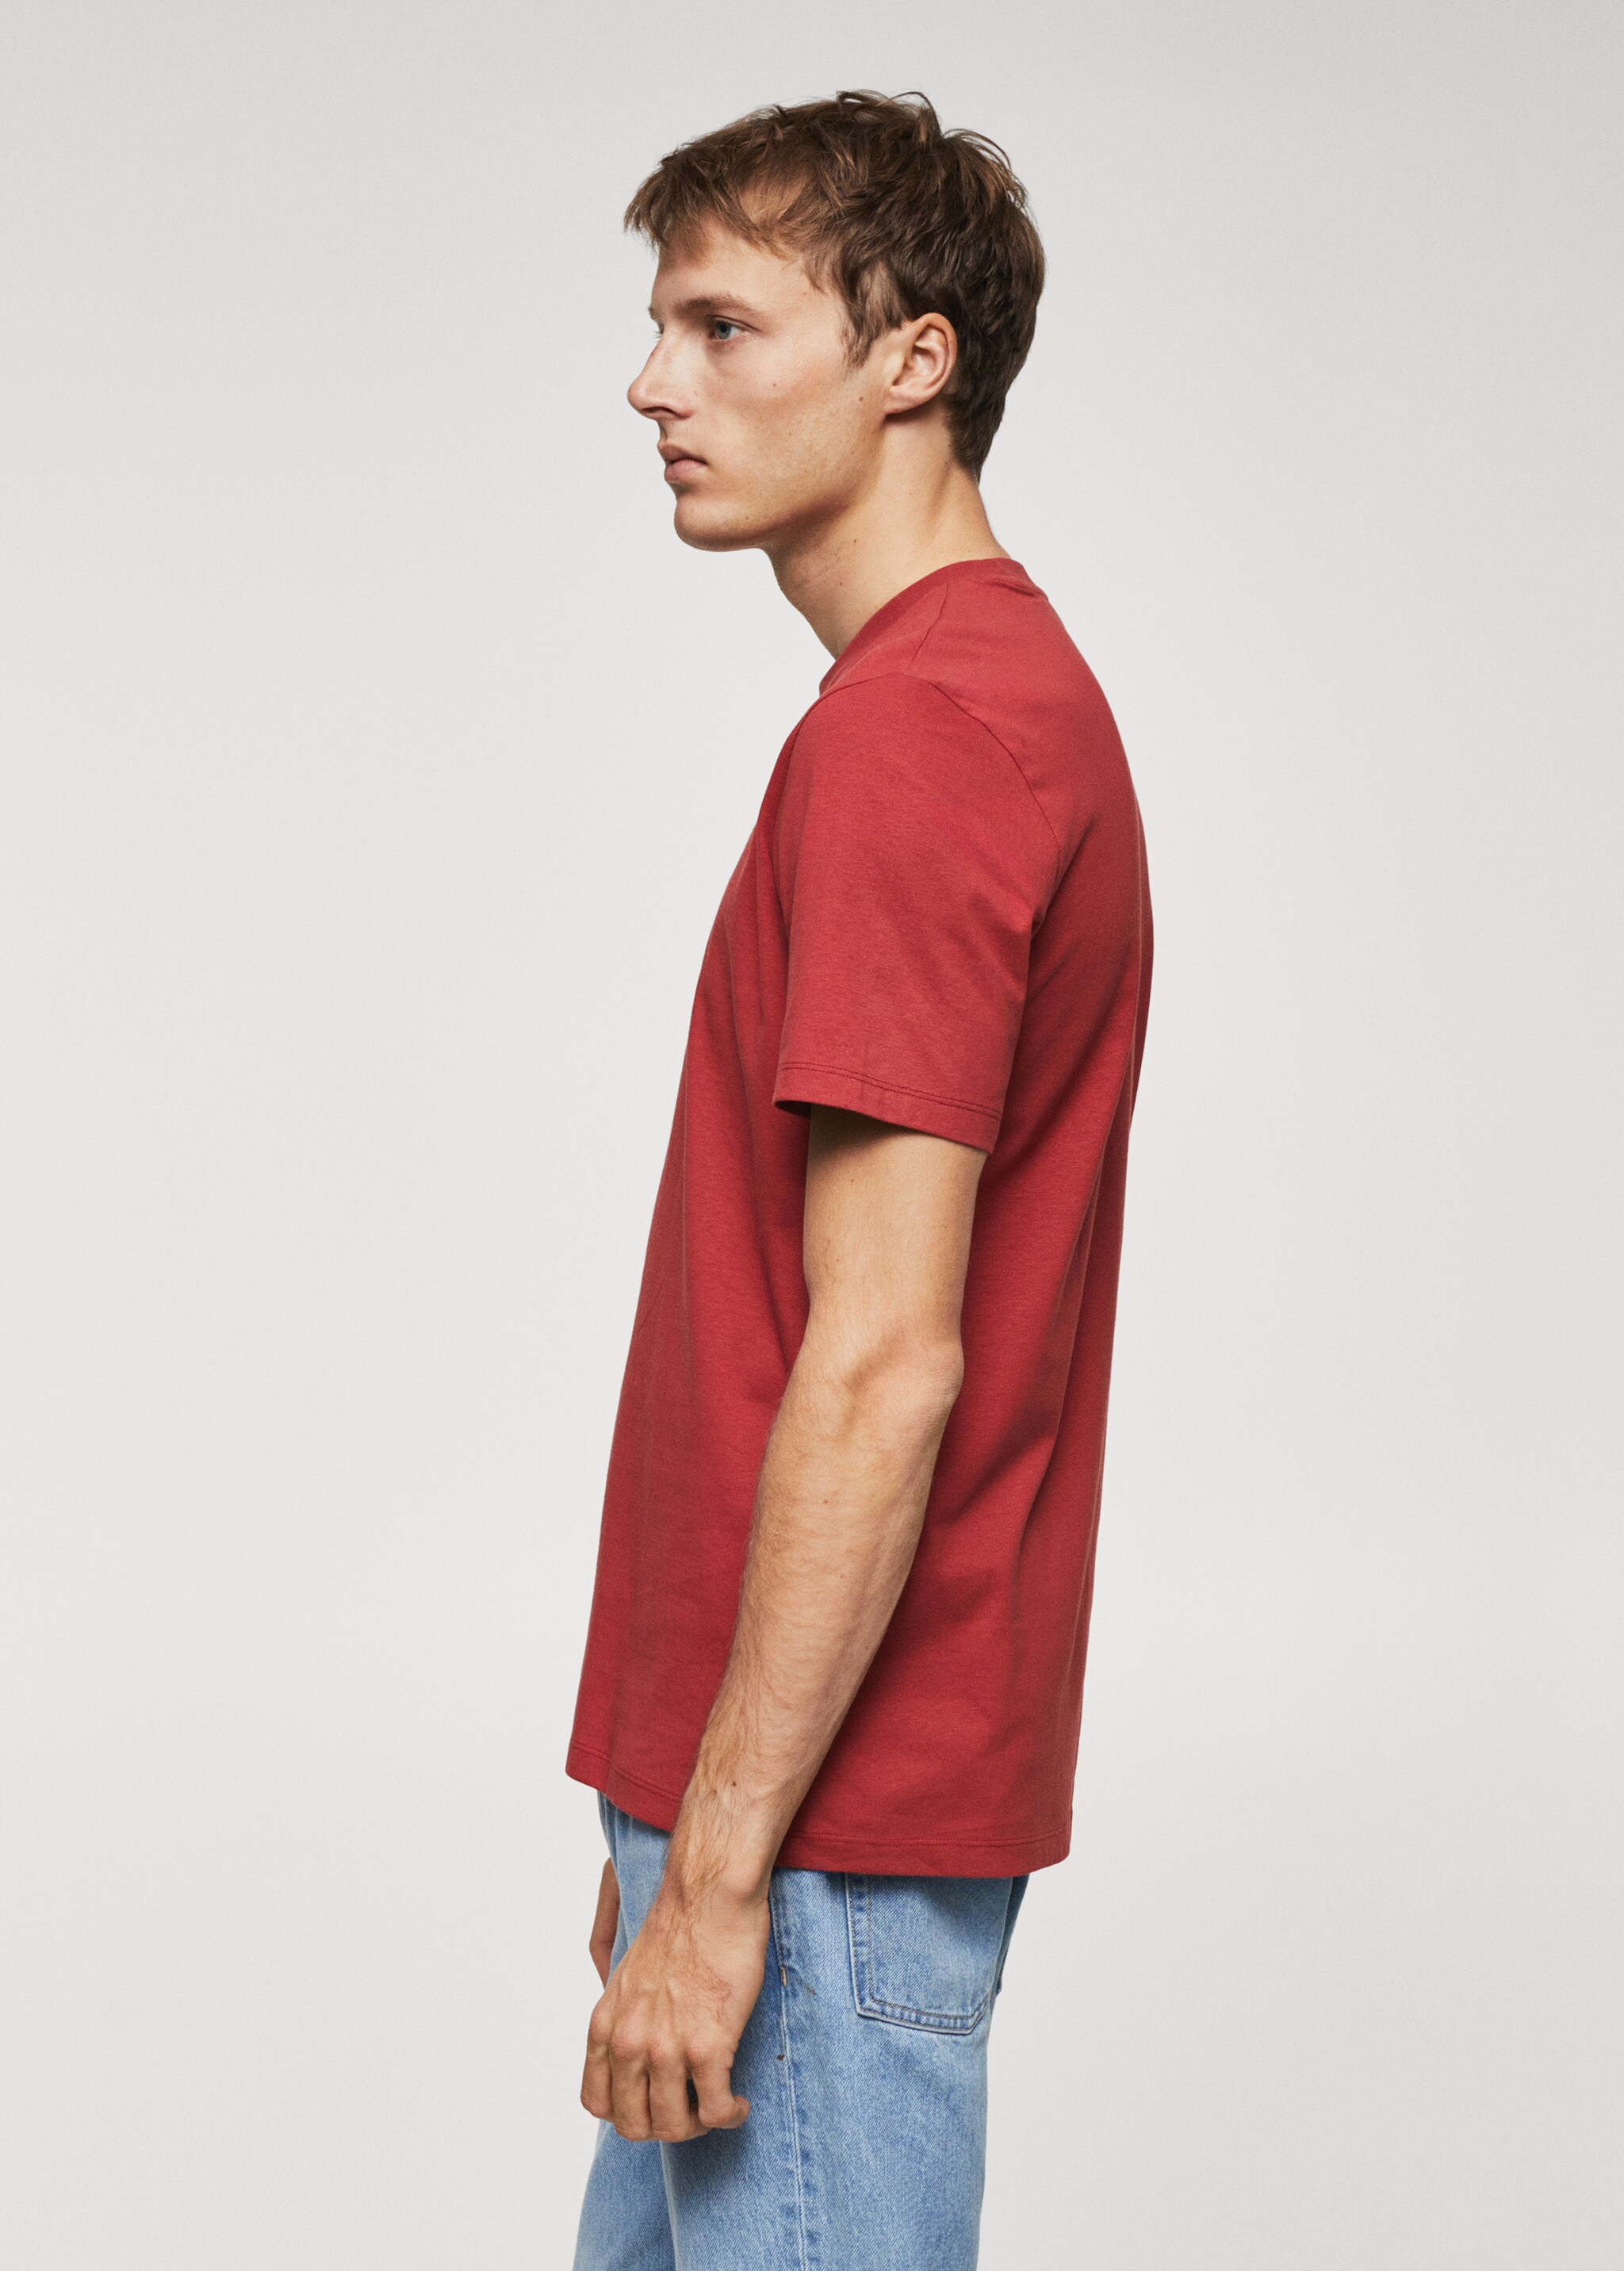 100% cotton t-shirt with embroidered logo - Details of the article 2